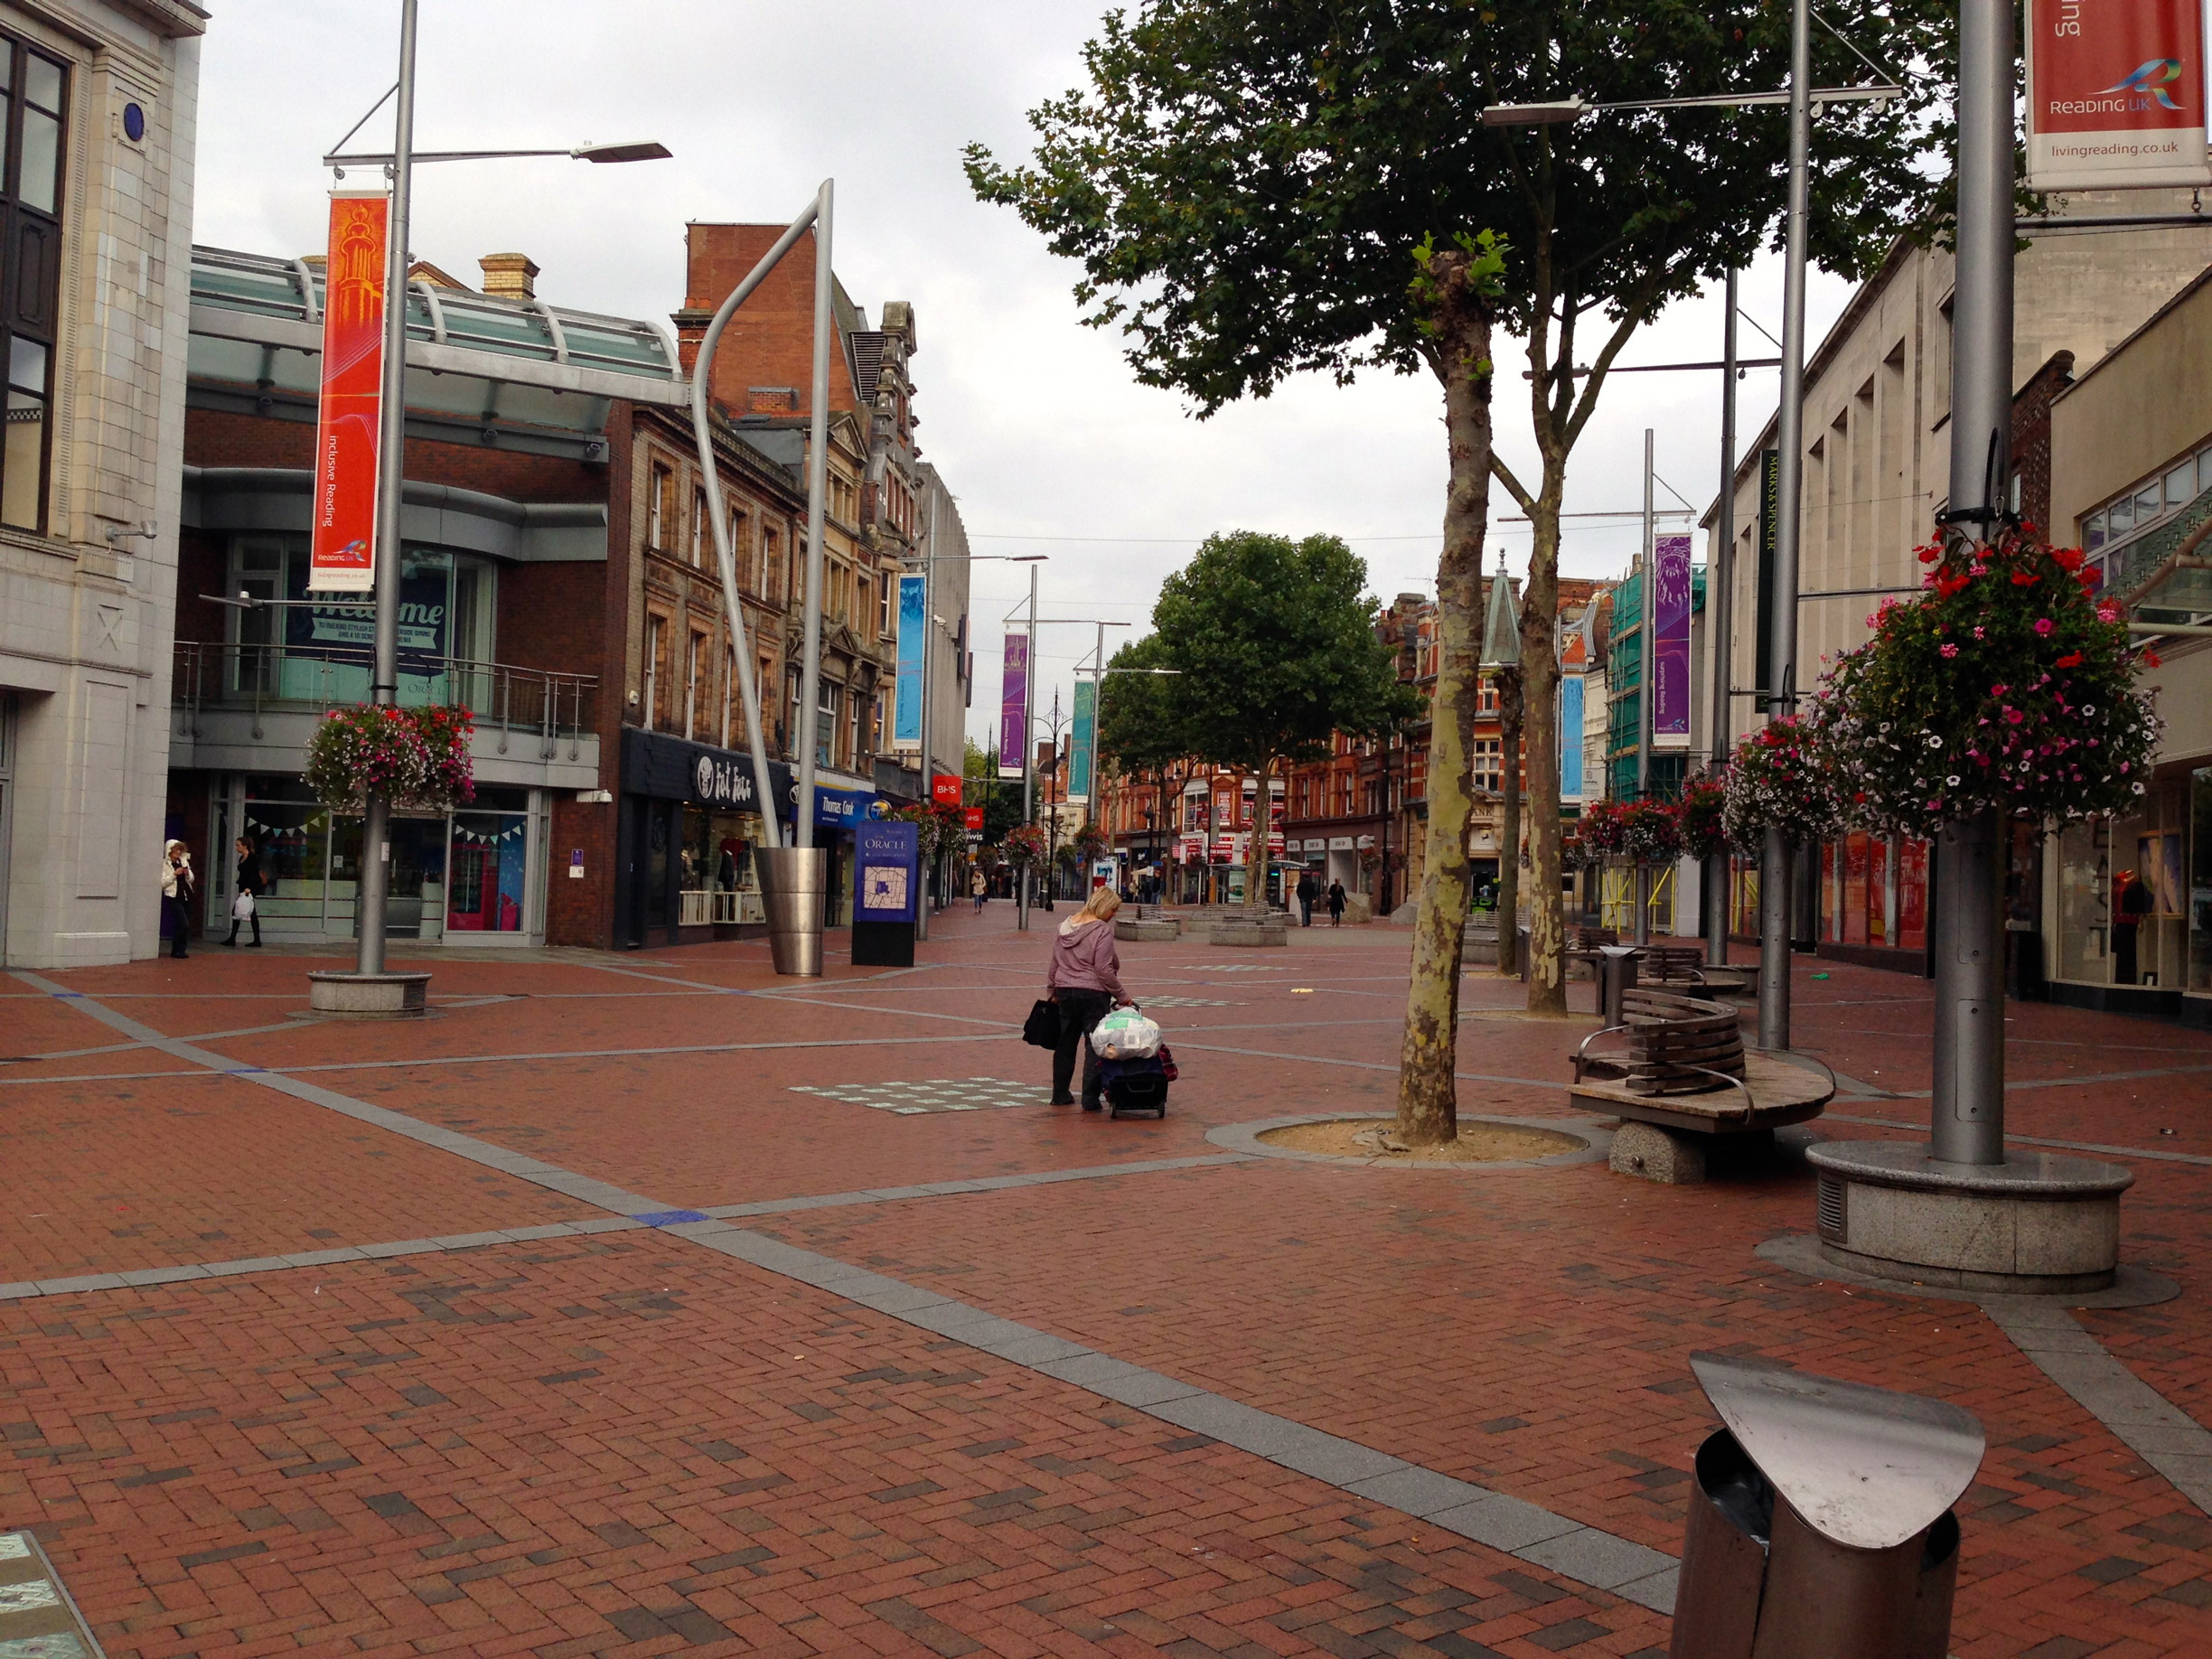 Broad Street, Reading - tons of shopping and restaurants